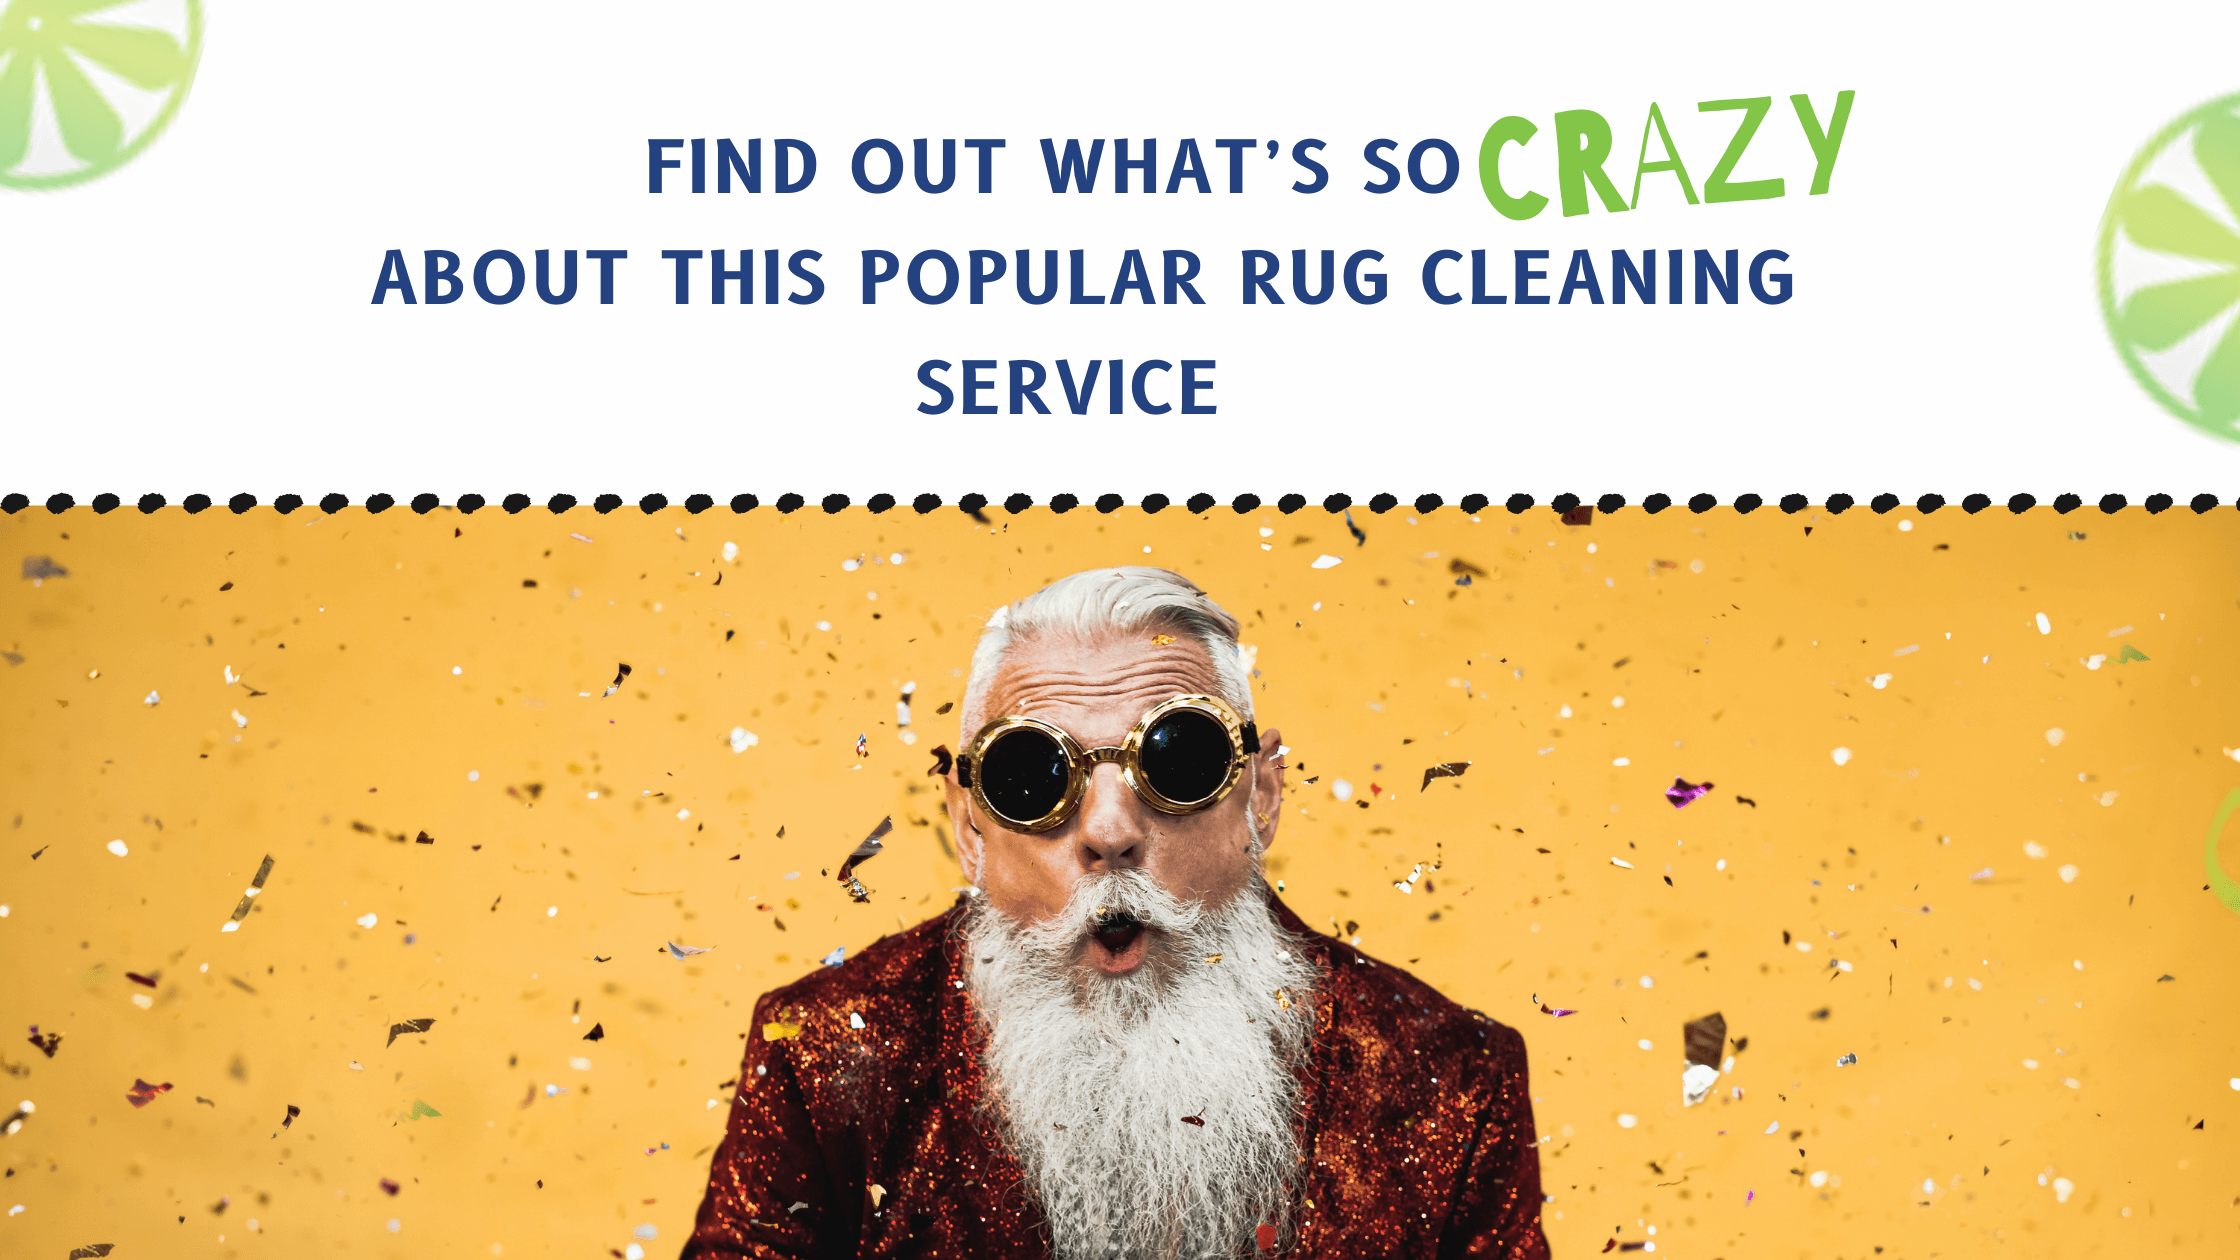 Find out what's so CRAZY about this popular rug cleaning service. 4